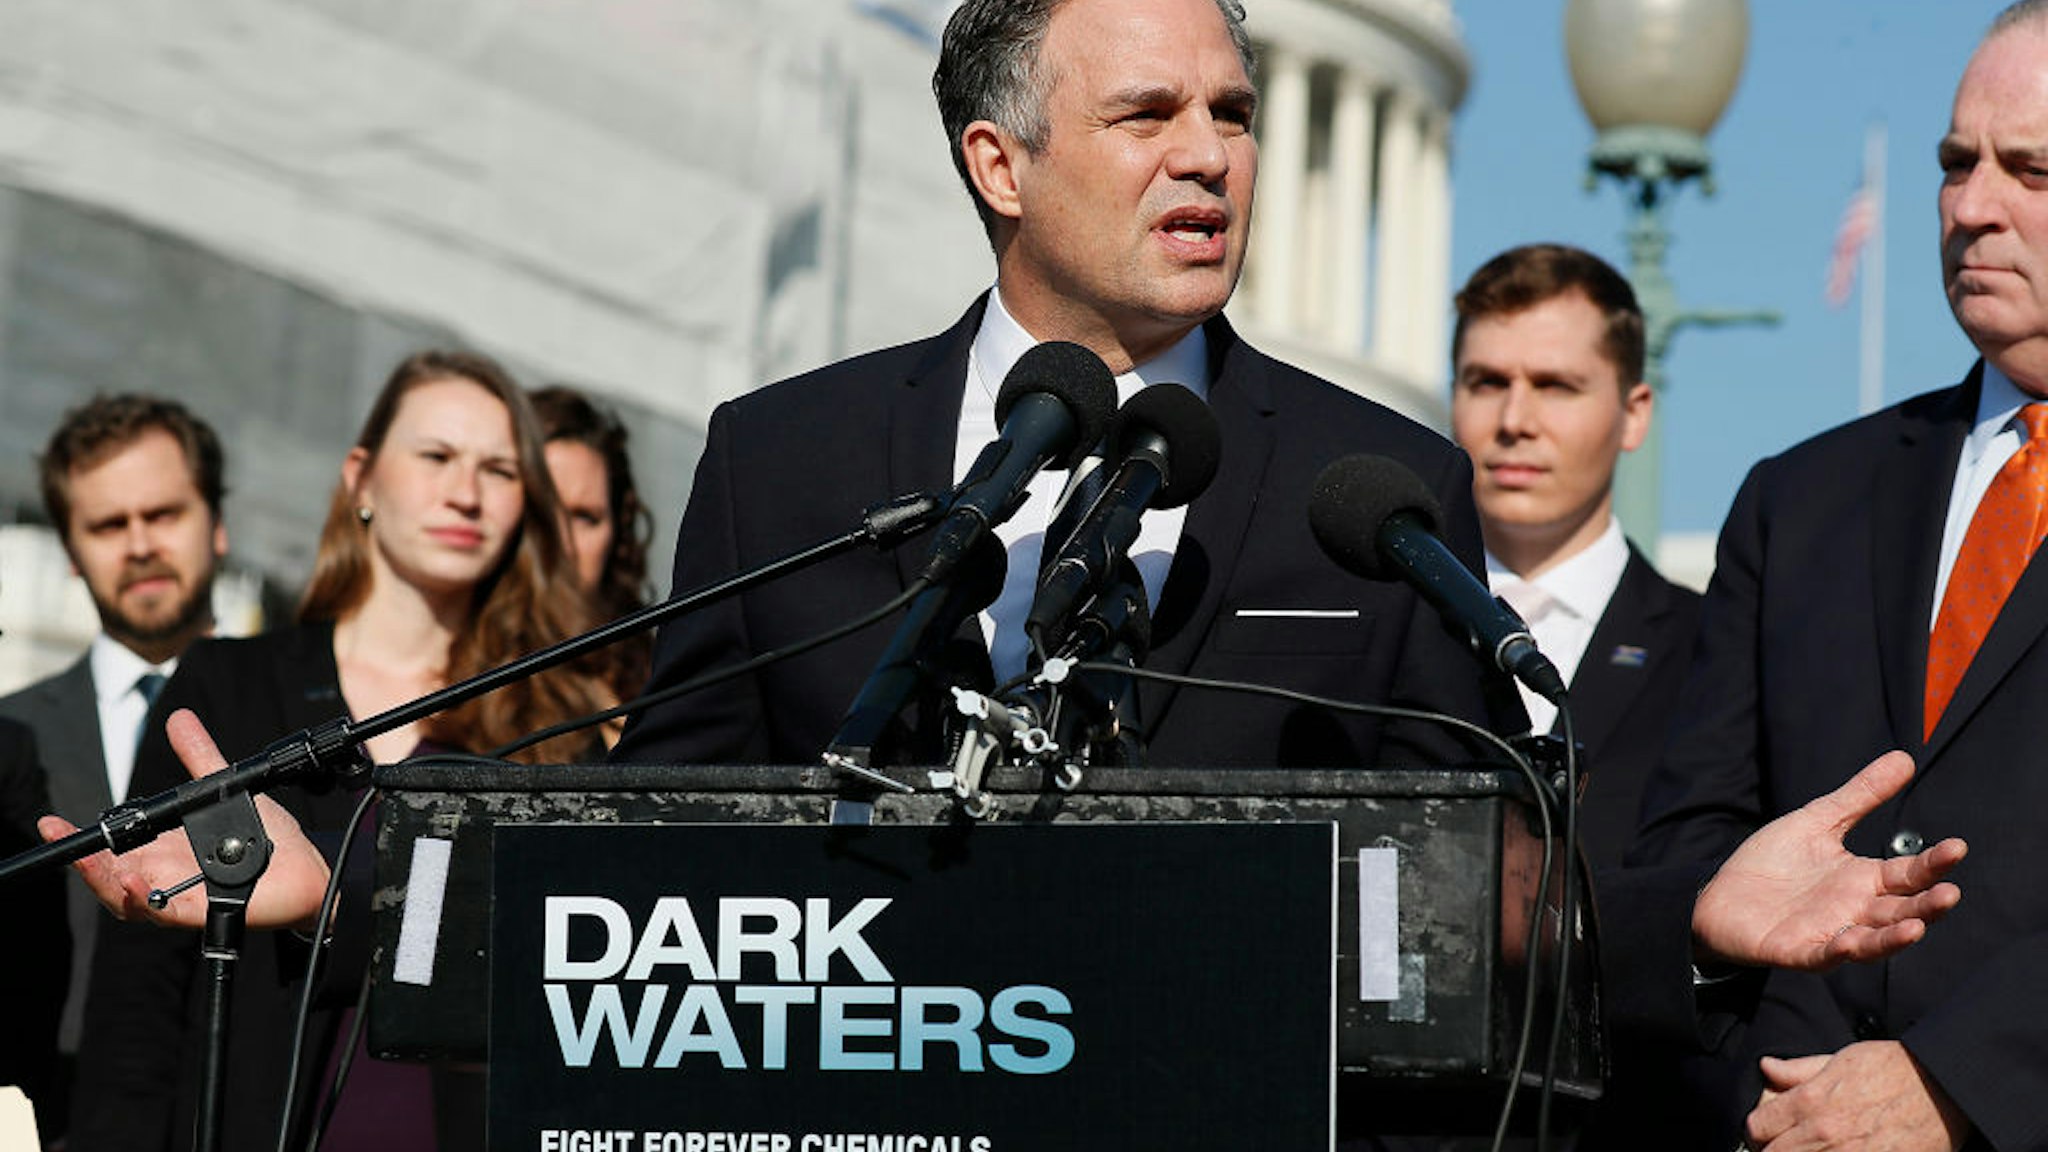 Actor and activist Mark Ruffalo speaks at the Fight Forever Chemicals Campaign kick off event on Capitol Hill on November 19, 2019 in Washington, DC. (Photo by Paul Morigi/Getty Images)